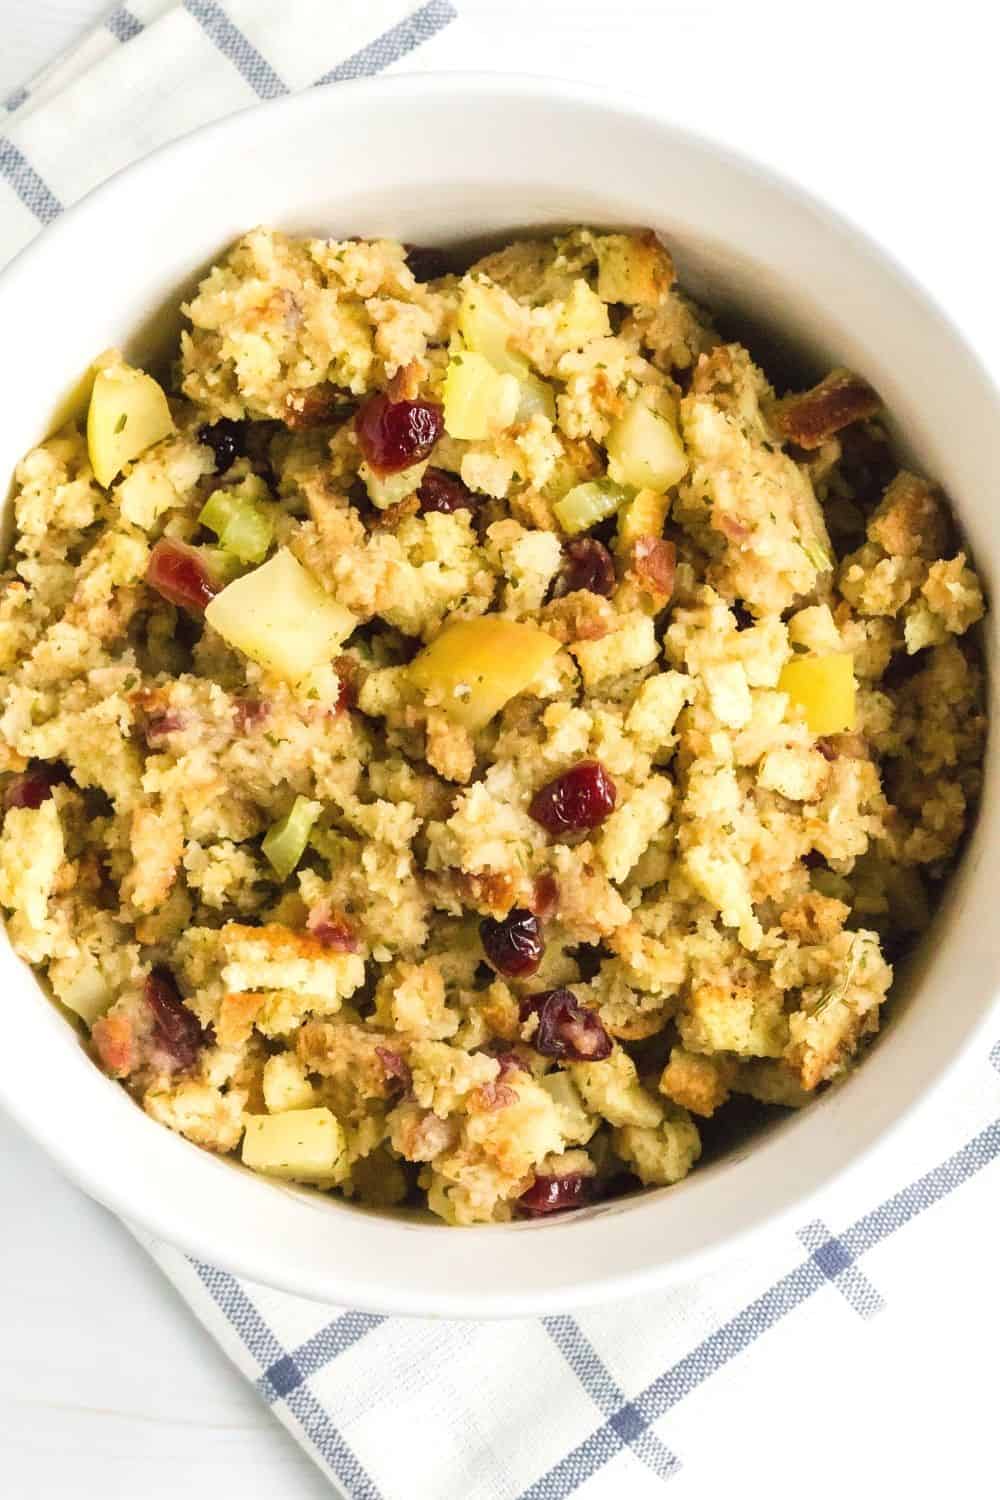 baking dish of stuffing with apples and cranberries, which was cooked in the Instant Pot pressure cooker